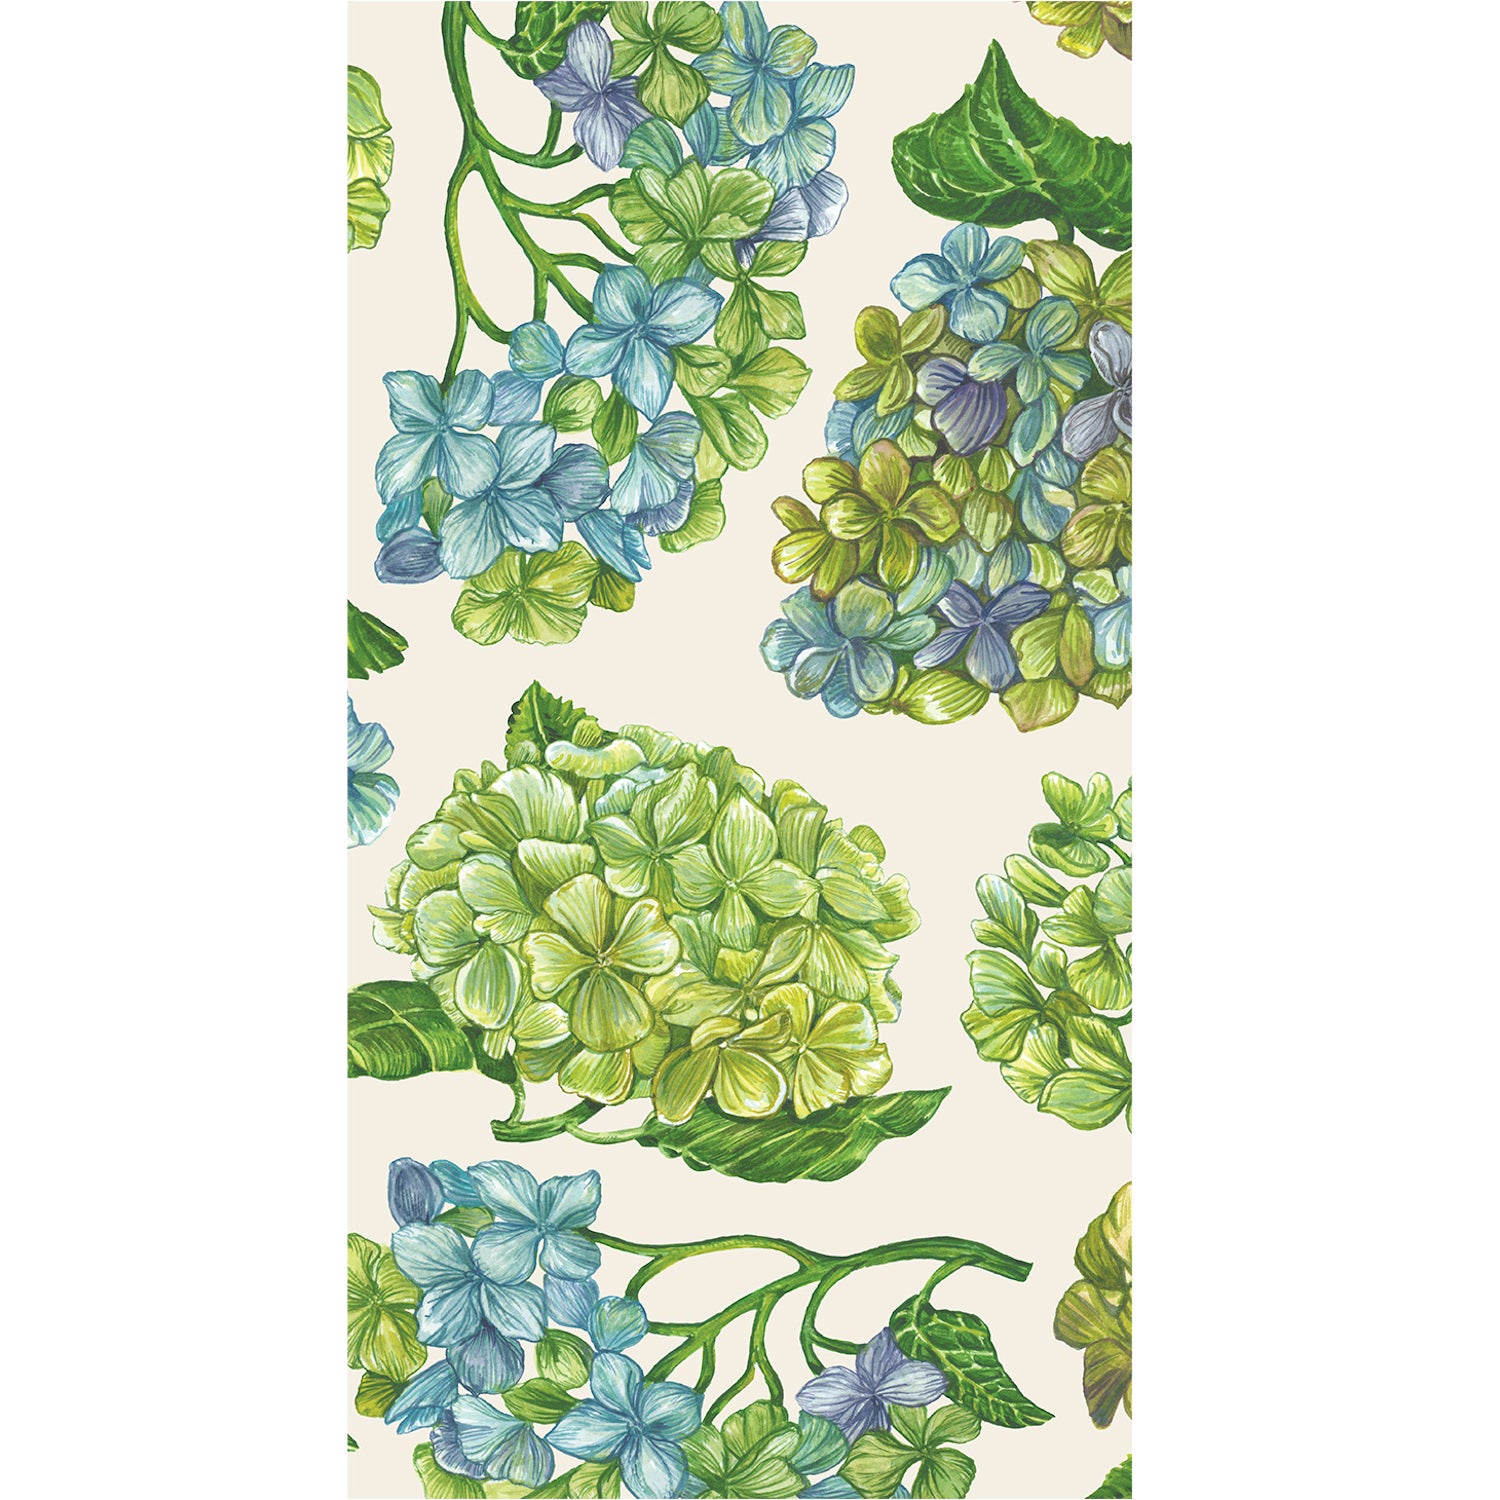 Hydrangea Napkins from Hester &amp; Cook, with a hydrangea pattern on a white background, are perfect for garden parties and guest napkins.